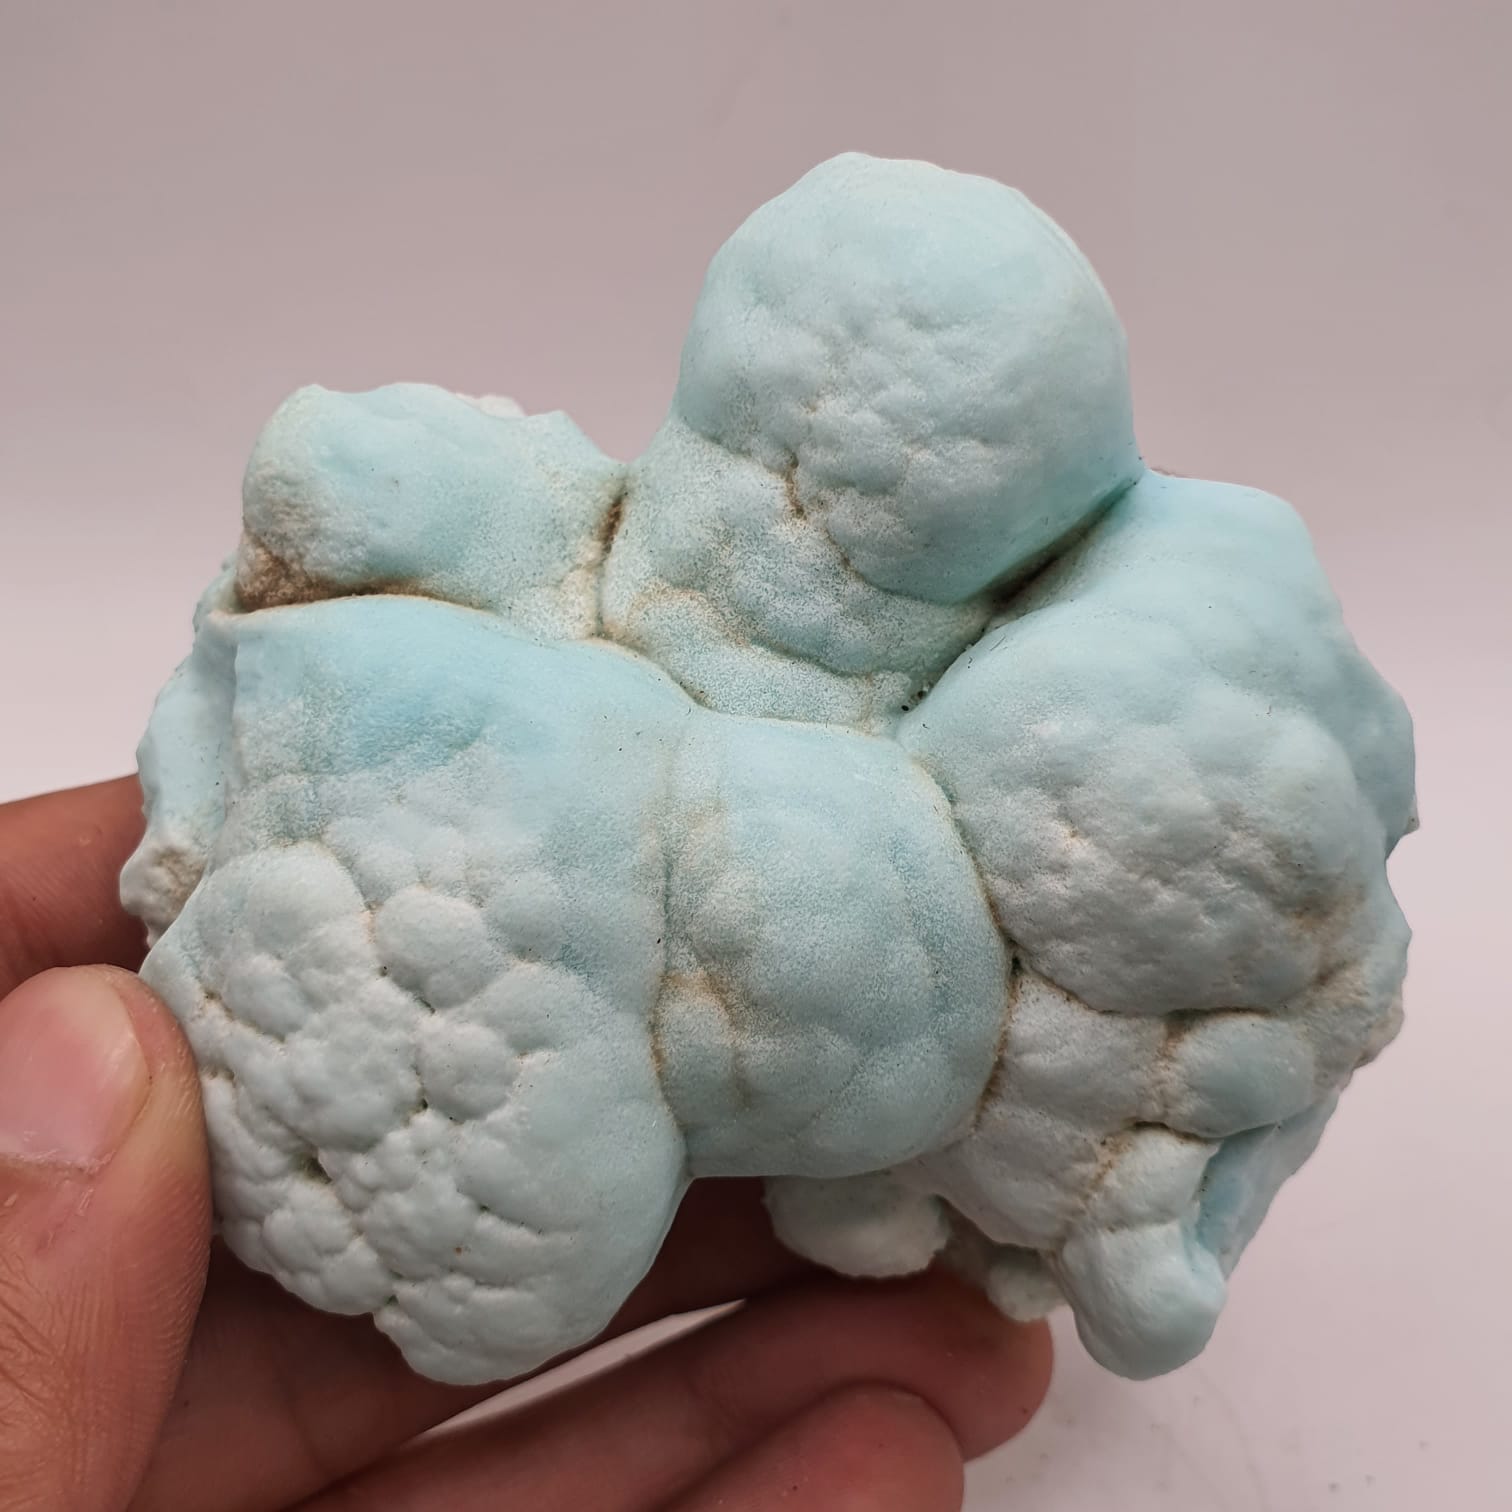 Lovely Botryoidal Aggregate Of Blue Aragonite